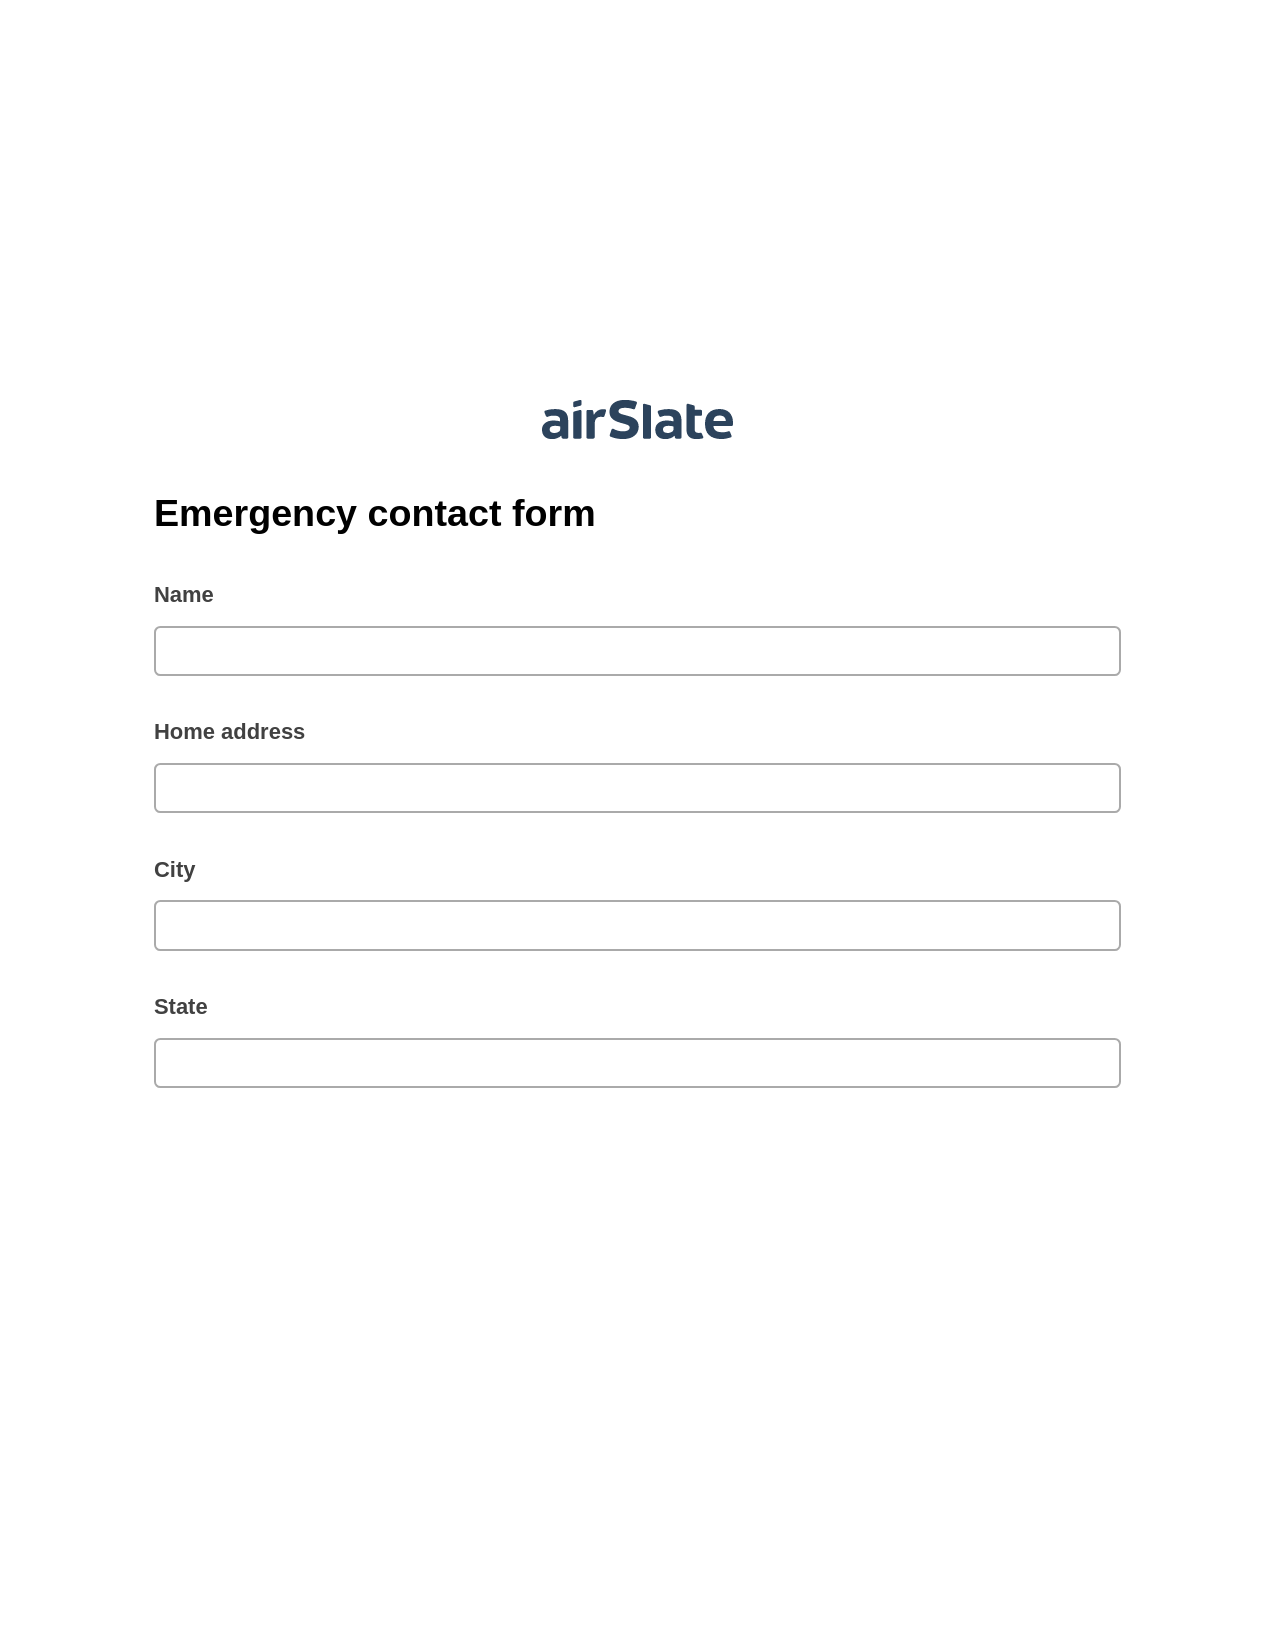 Multirole Emergency contact form Pre-fill from NetSuite Records Bot, Mailchimp send Campaign bot, Export to Excel 365 Bot